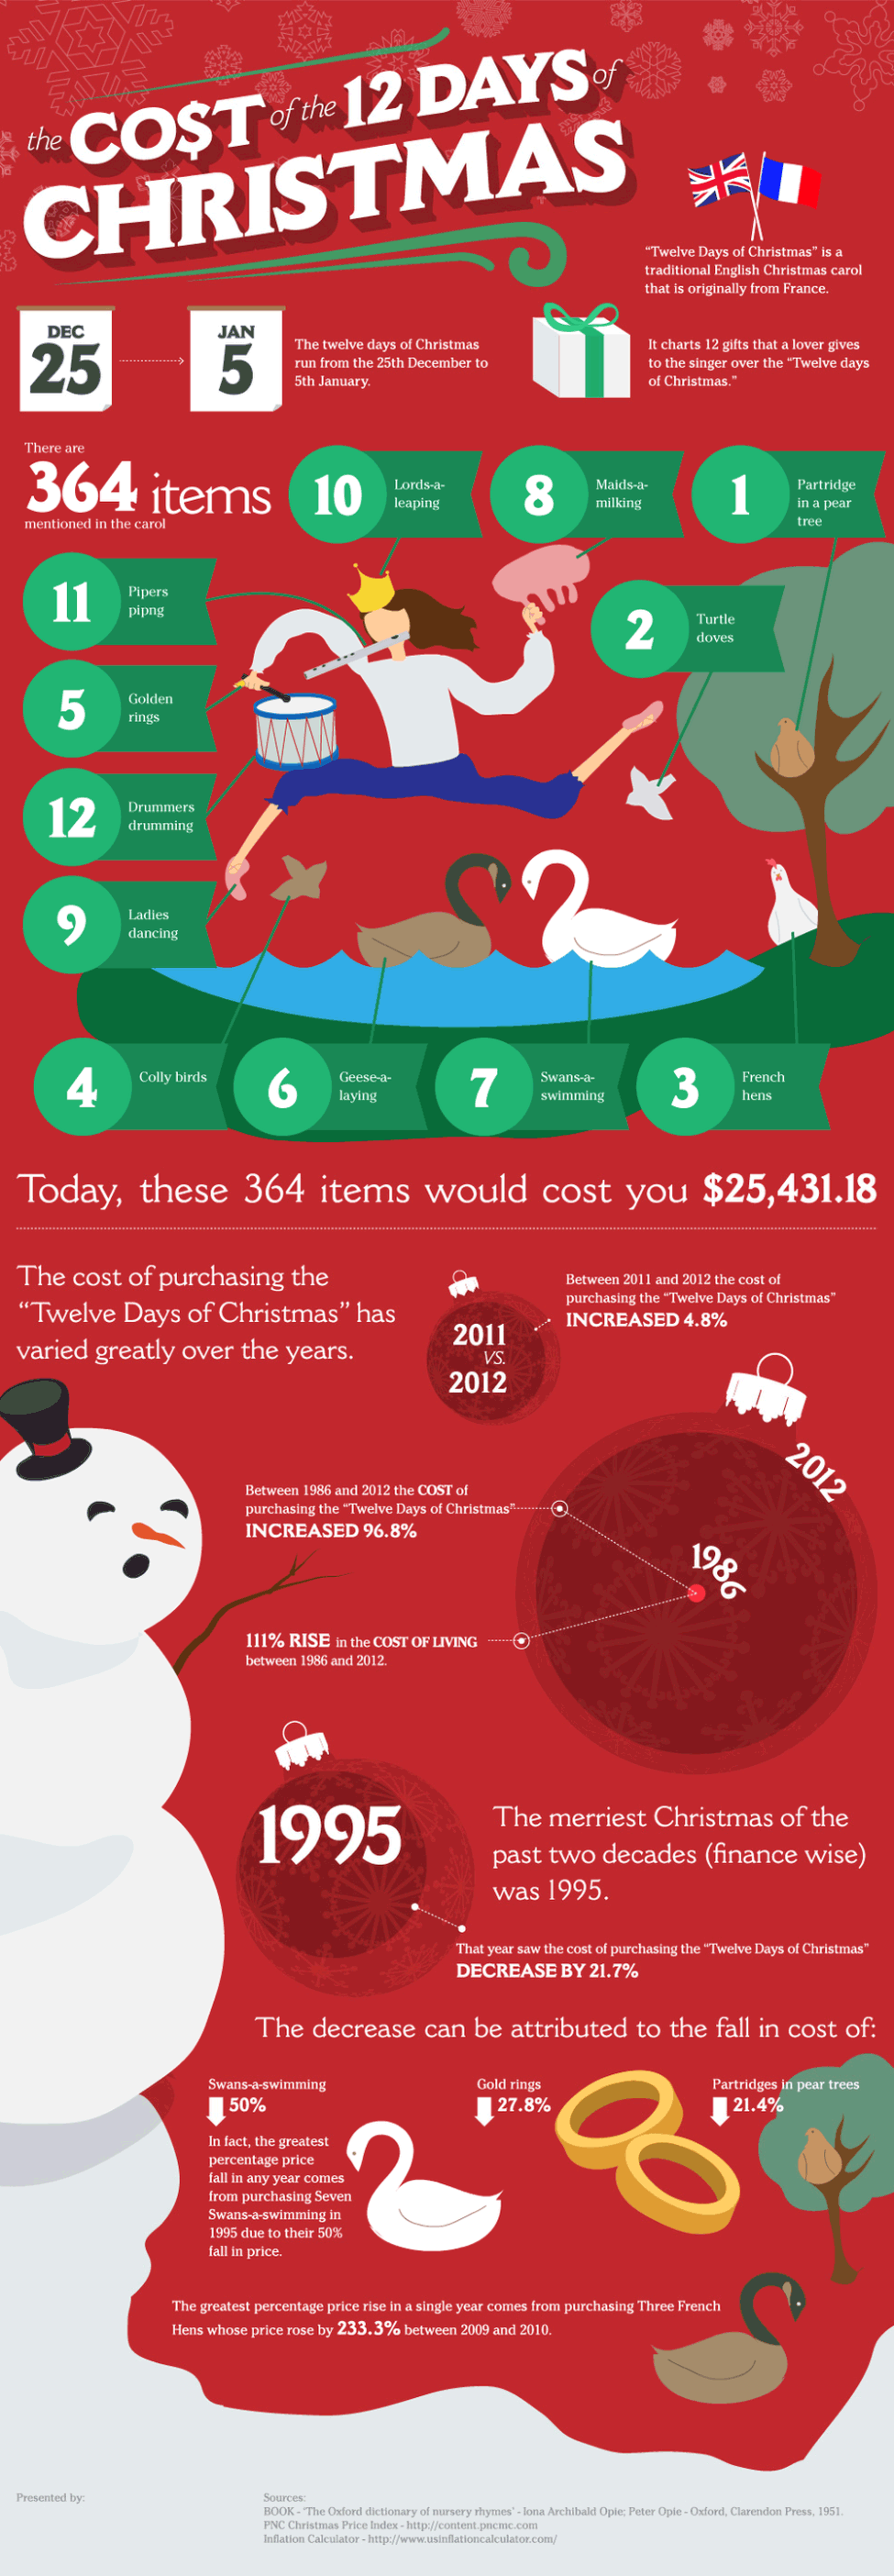 the-cost-of-12-days-of-christmas